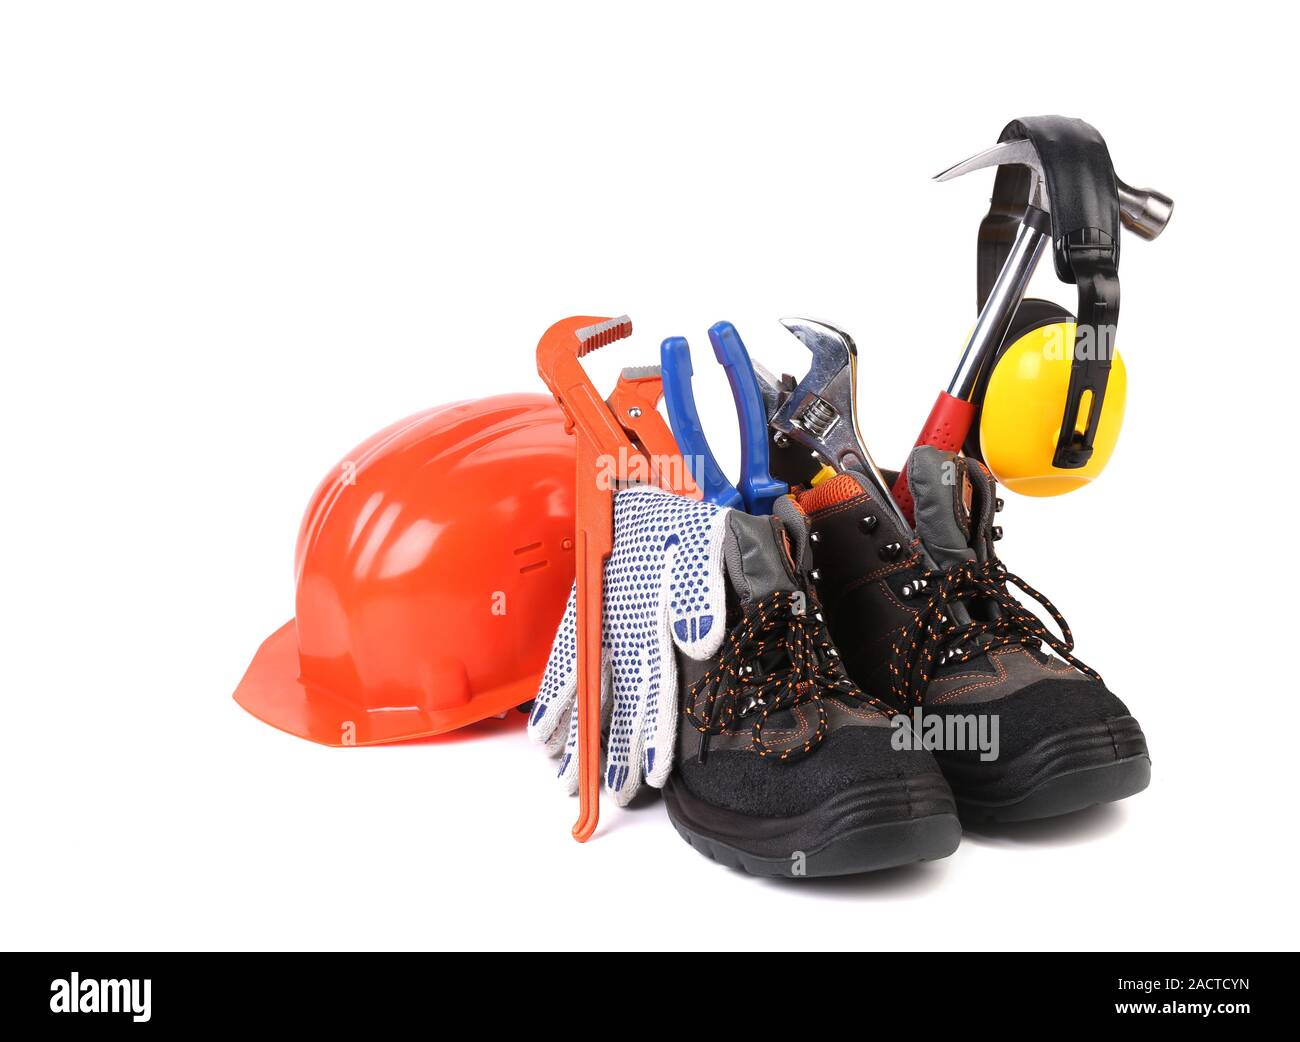 Articles of fitter. Stock Photo